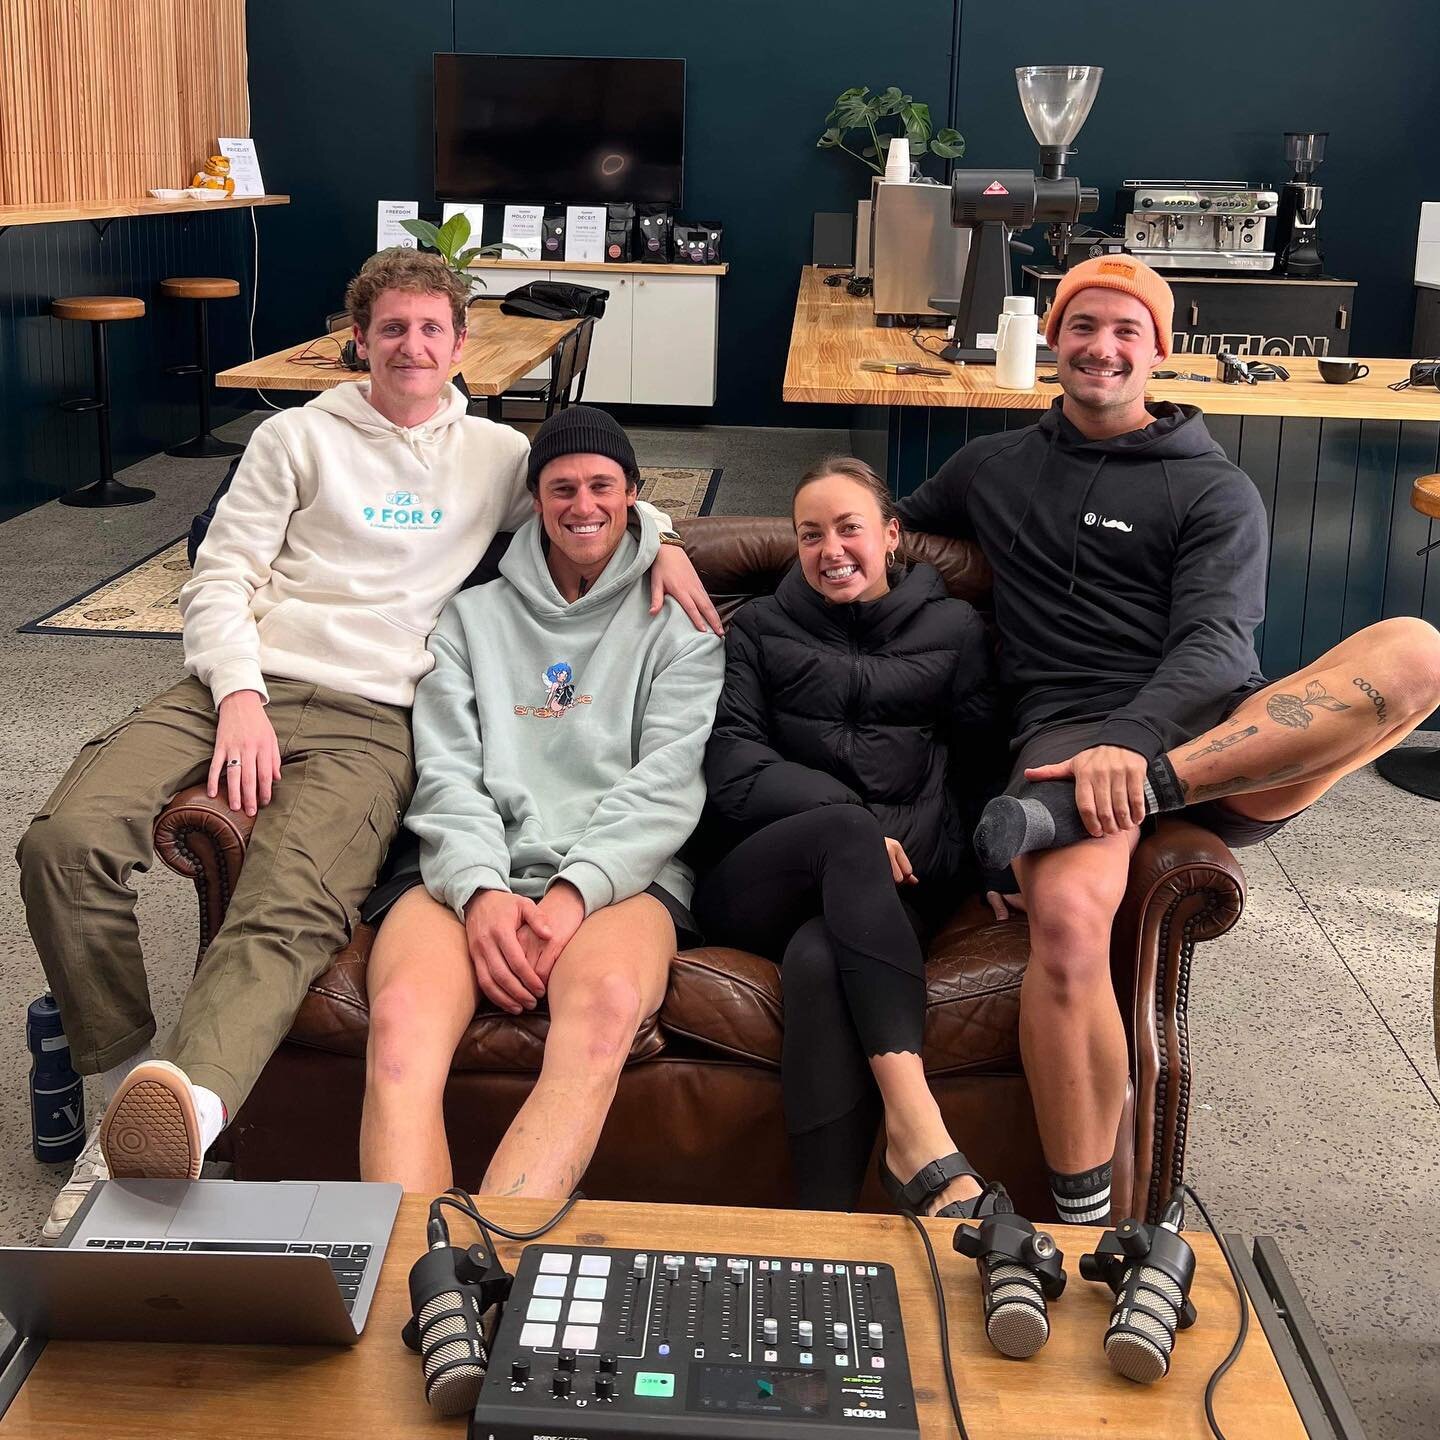 This week we are joined by&nbsp; Kristian Serainidis, Nat Di Conza &amp; Tayla Smith from @projectkickit for Episode 7 of our #9FOR9 Real Talk Series.

We discuss Nat &amp; Tayla&rsquo;s journey&rsquo;s into the Project Kick It team, their passion an